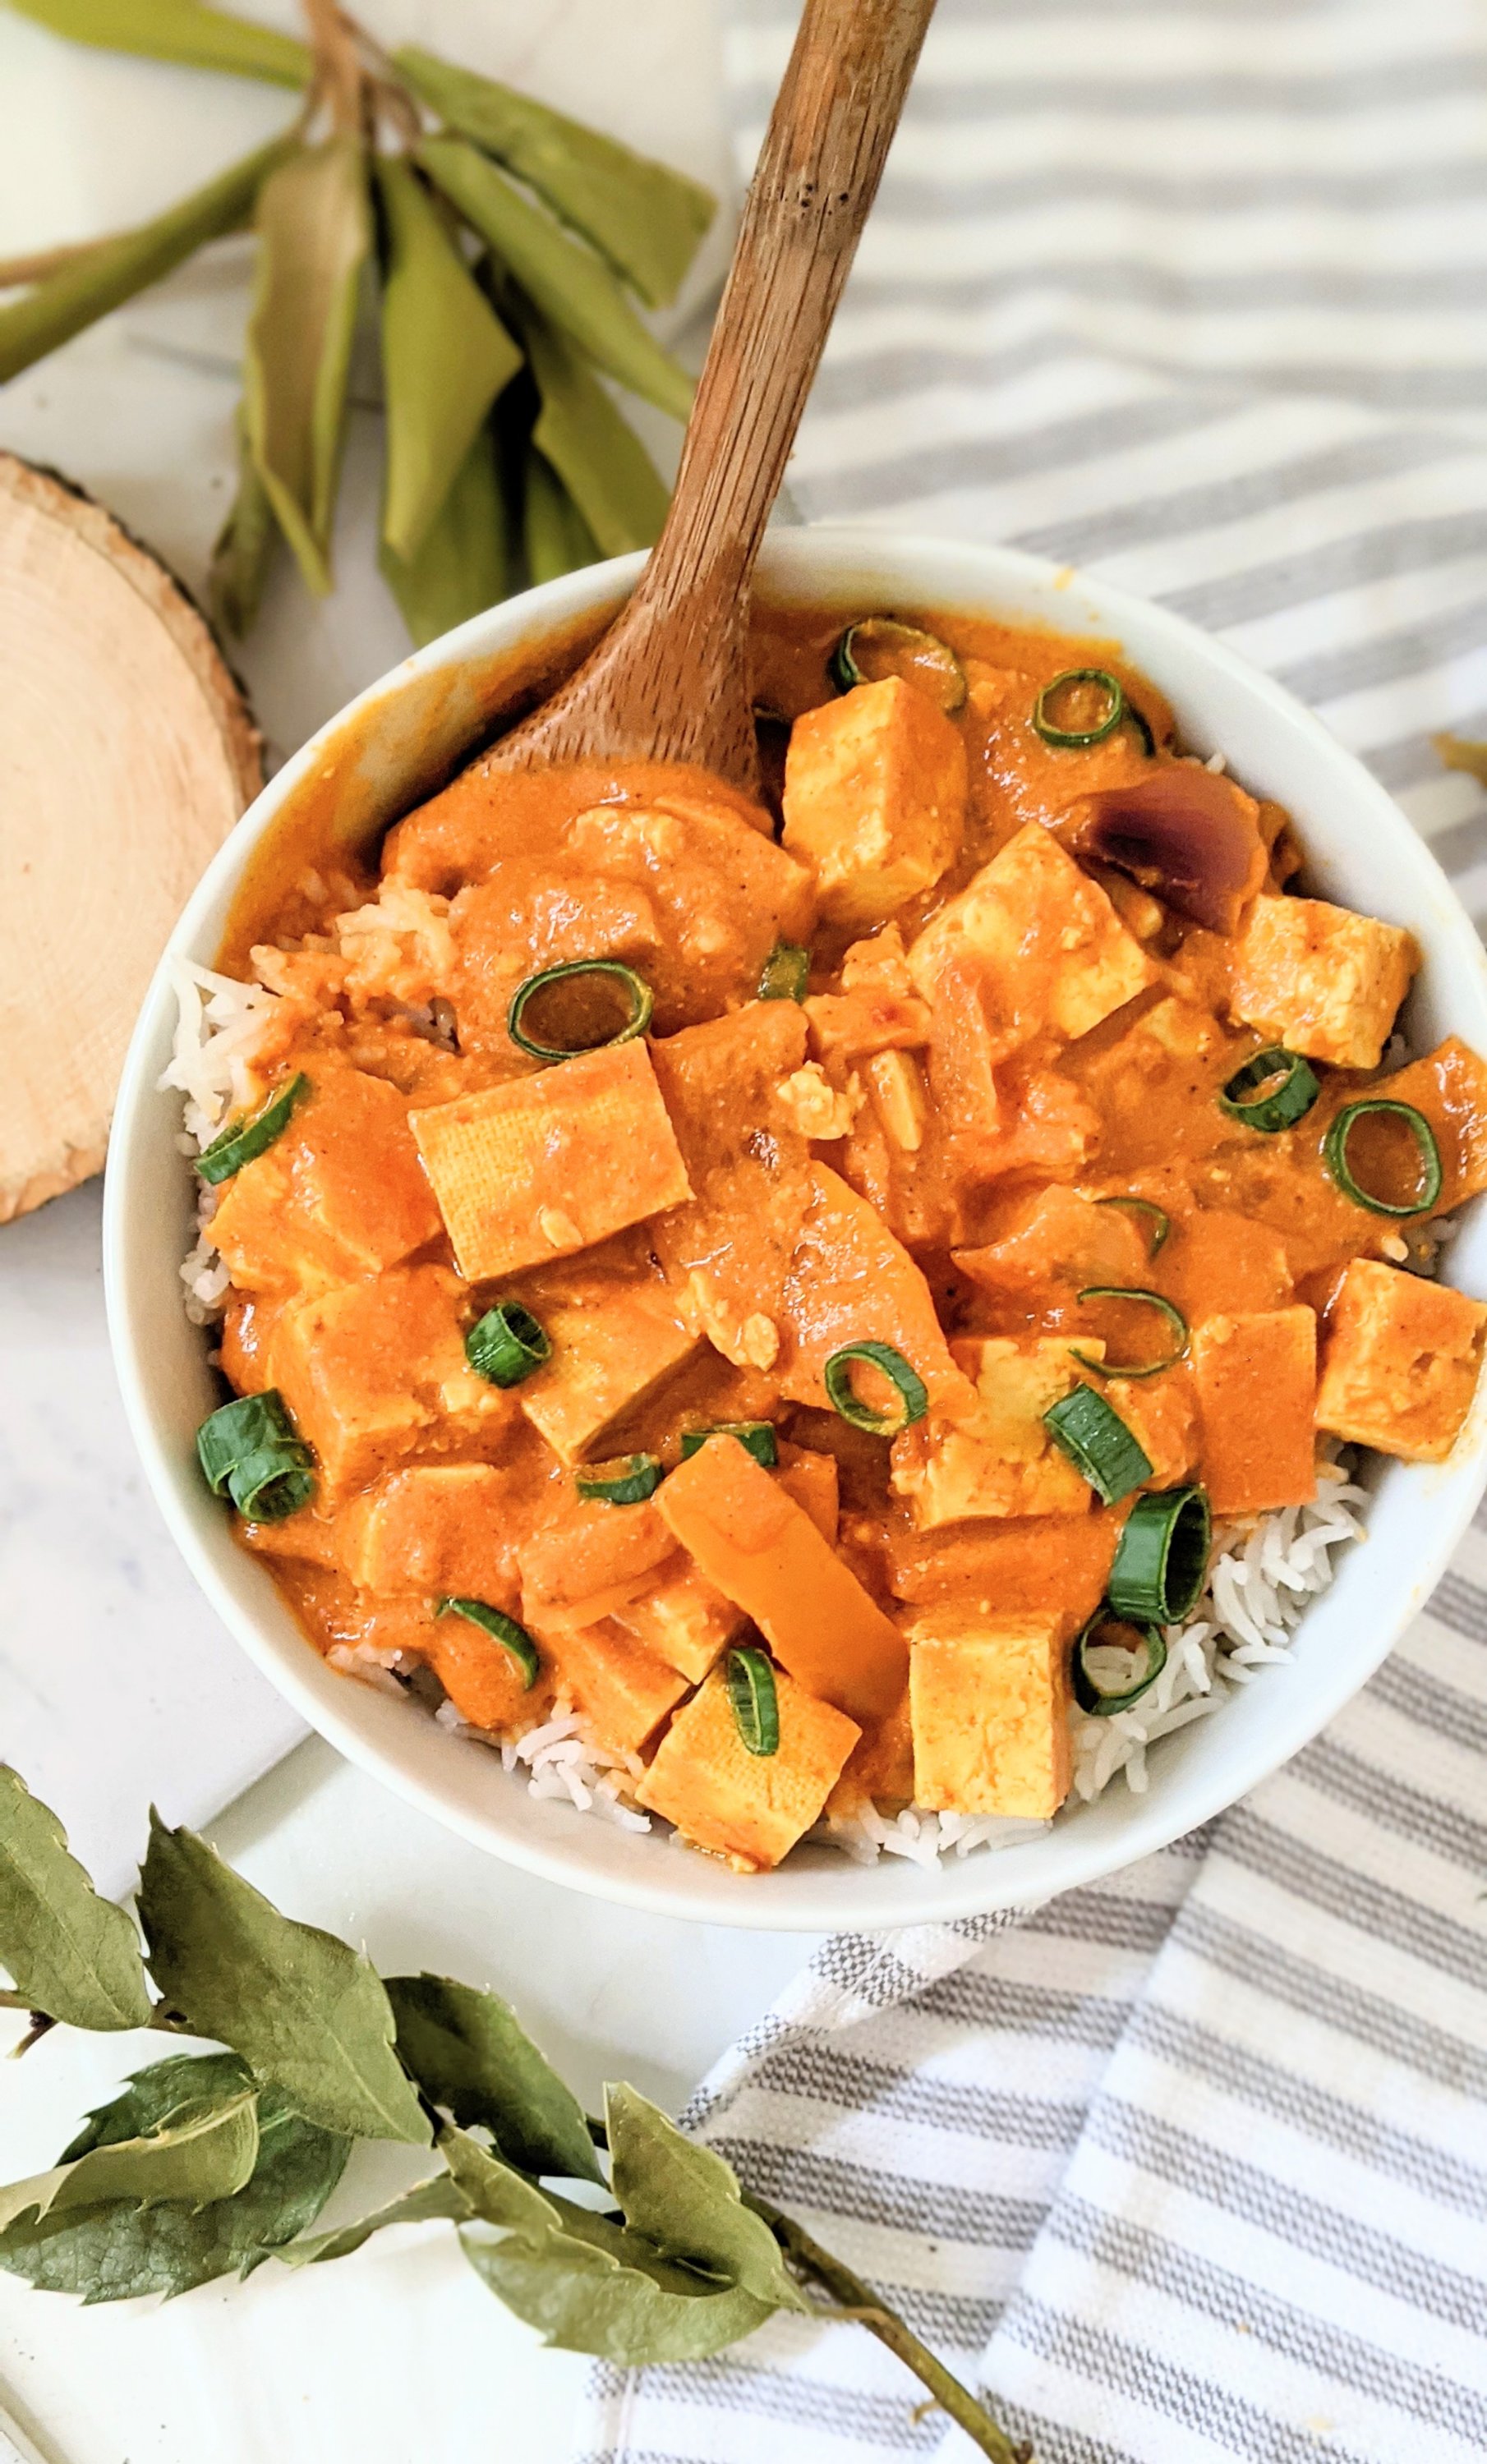 vegan butter tofu recipe dairy free gluten free vegetarian indian recipes with tofu for dinner healthy creamy indian stews with basmati rice and garlic naan